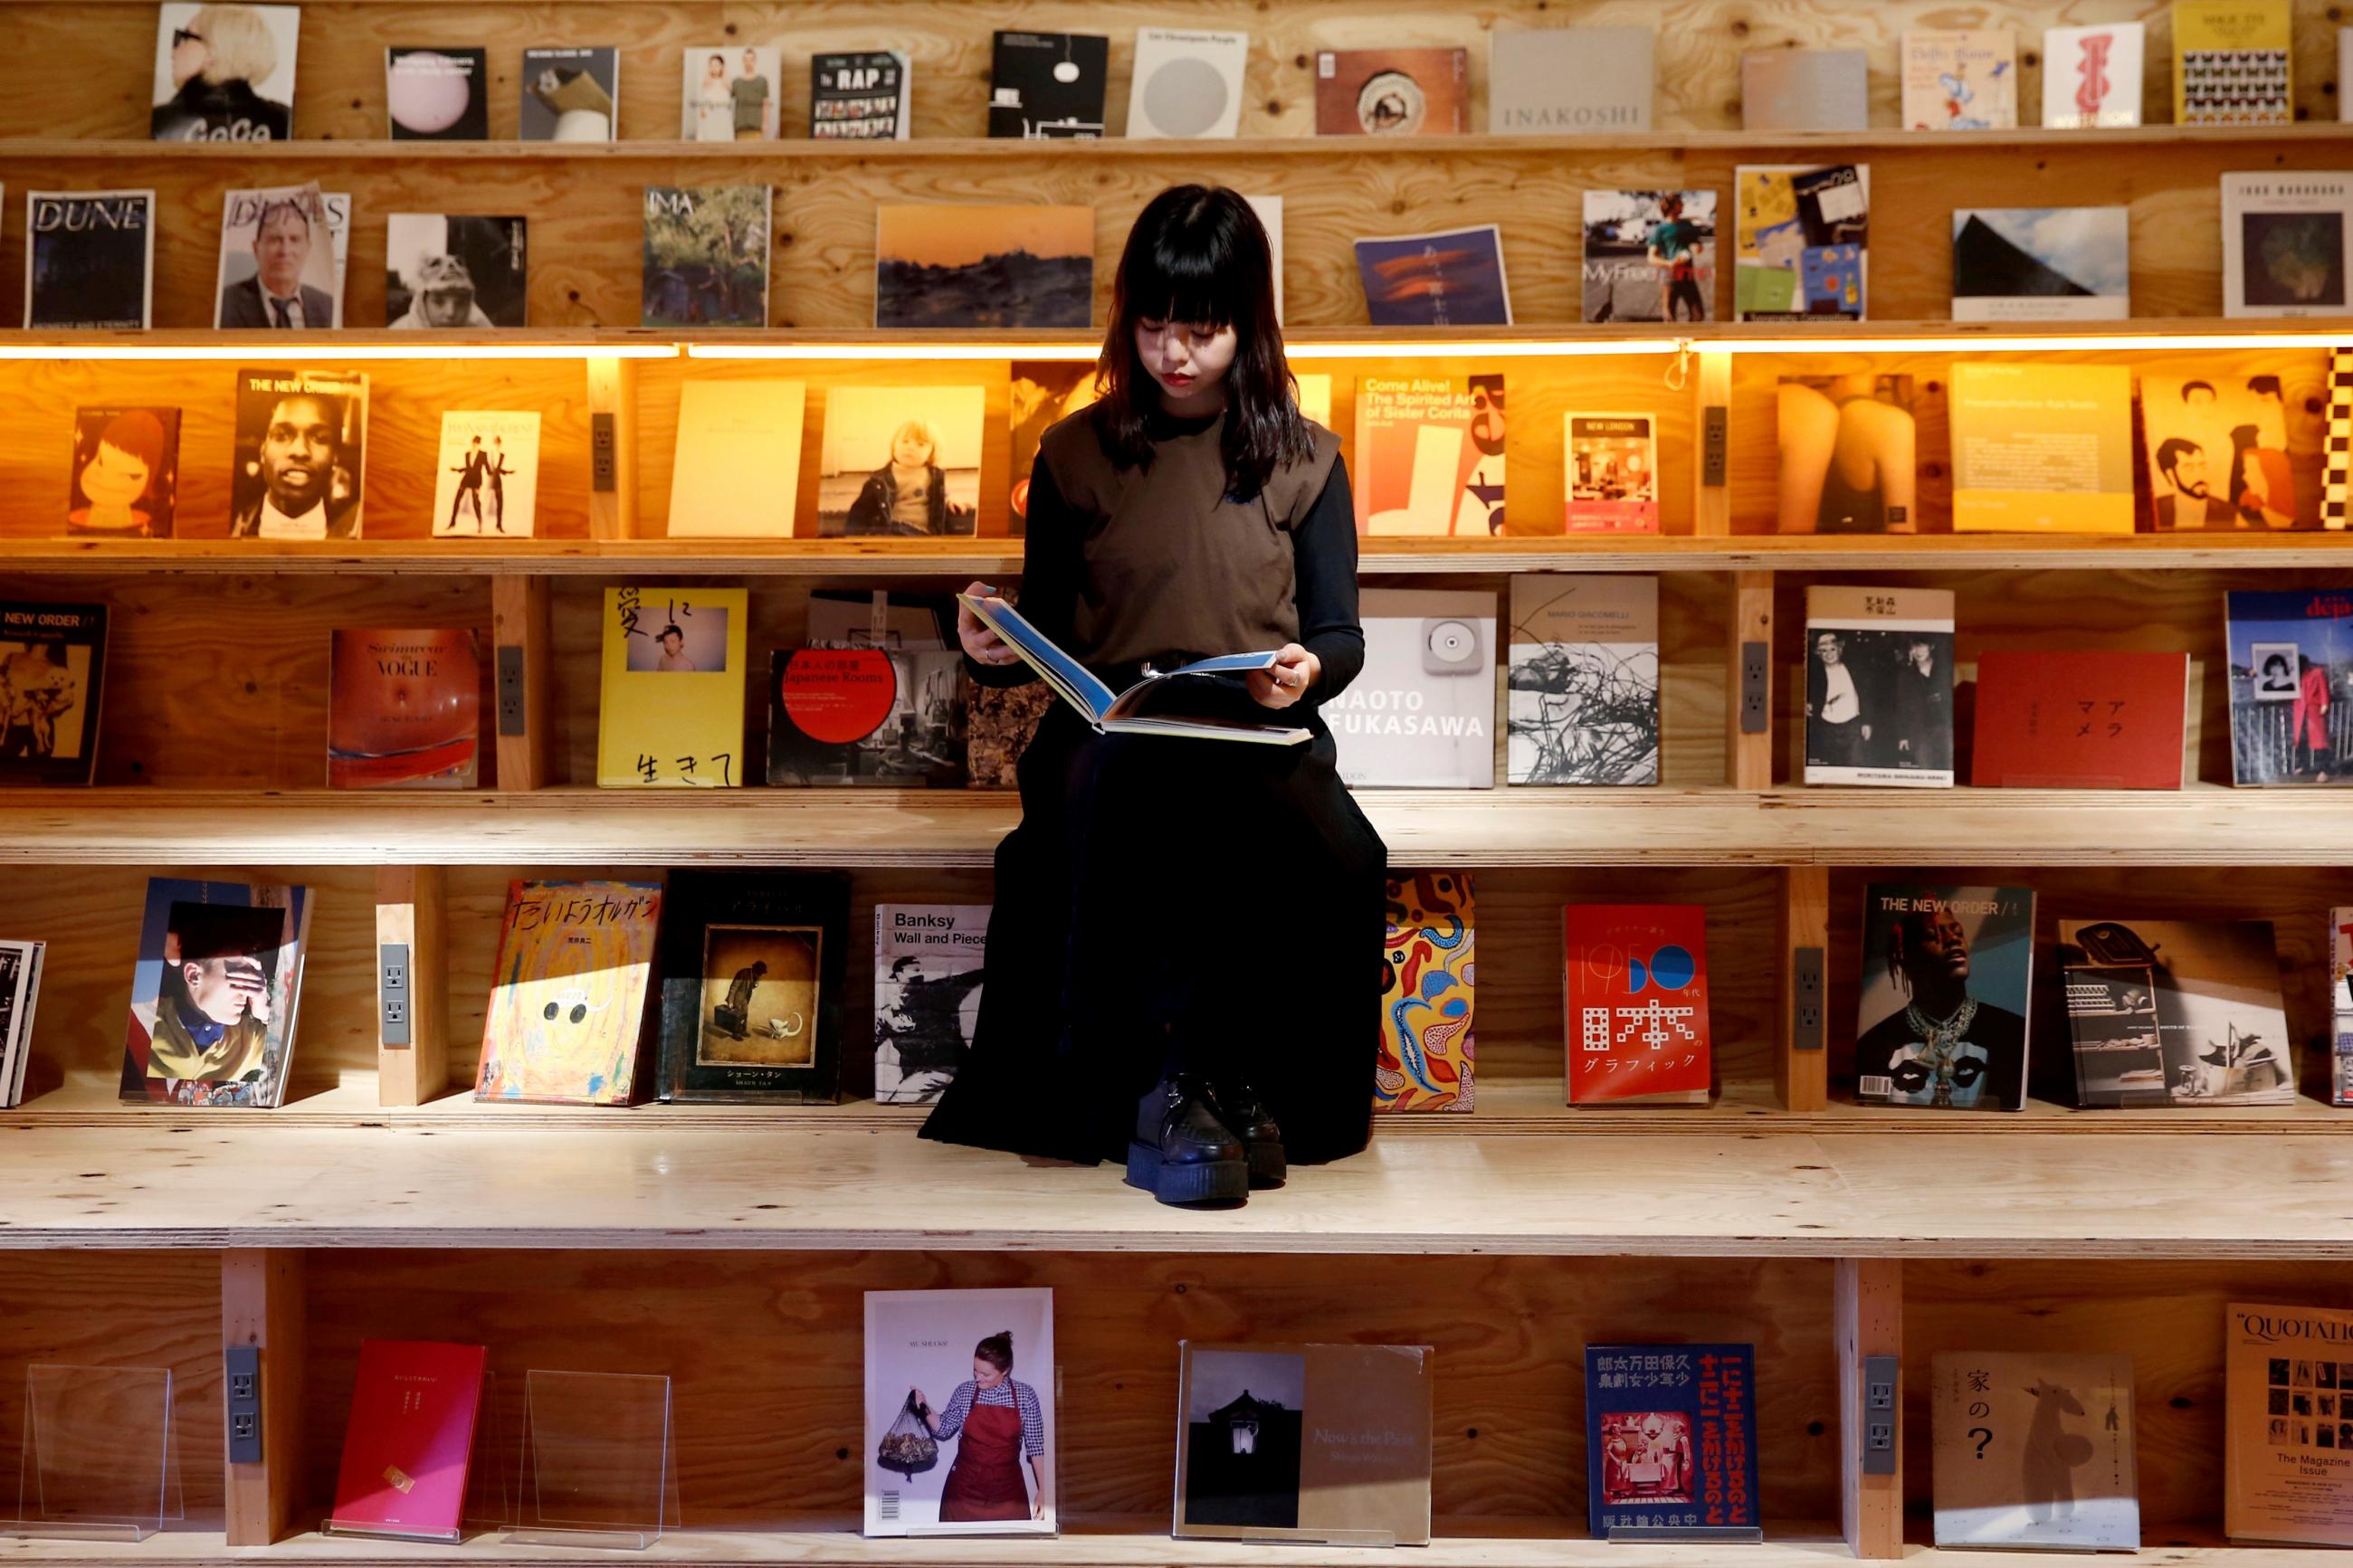 A woman reads a book at the Shinjuku branch of Book and Bed, an accommodation combined with book cafe where guests can sleep in hidden bunks built into a large bookshelf, during a photo opportunity in Tokyo, Japan September 14, 2018.